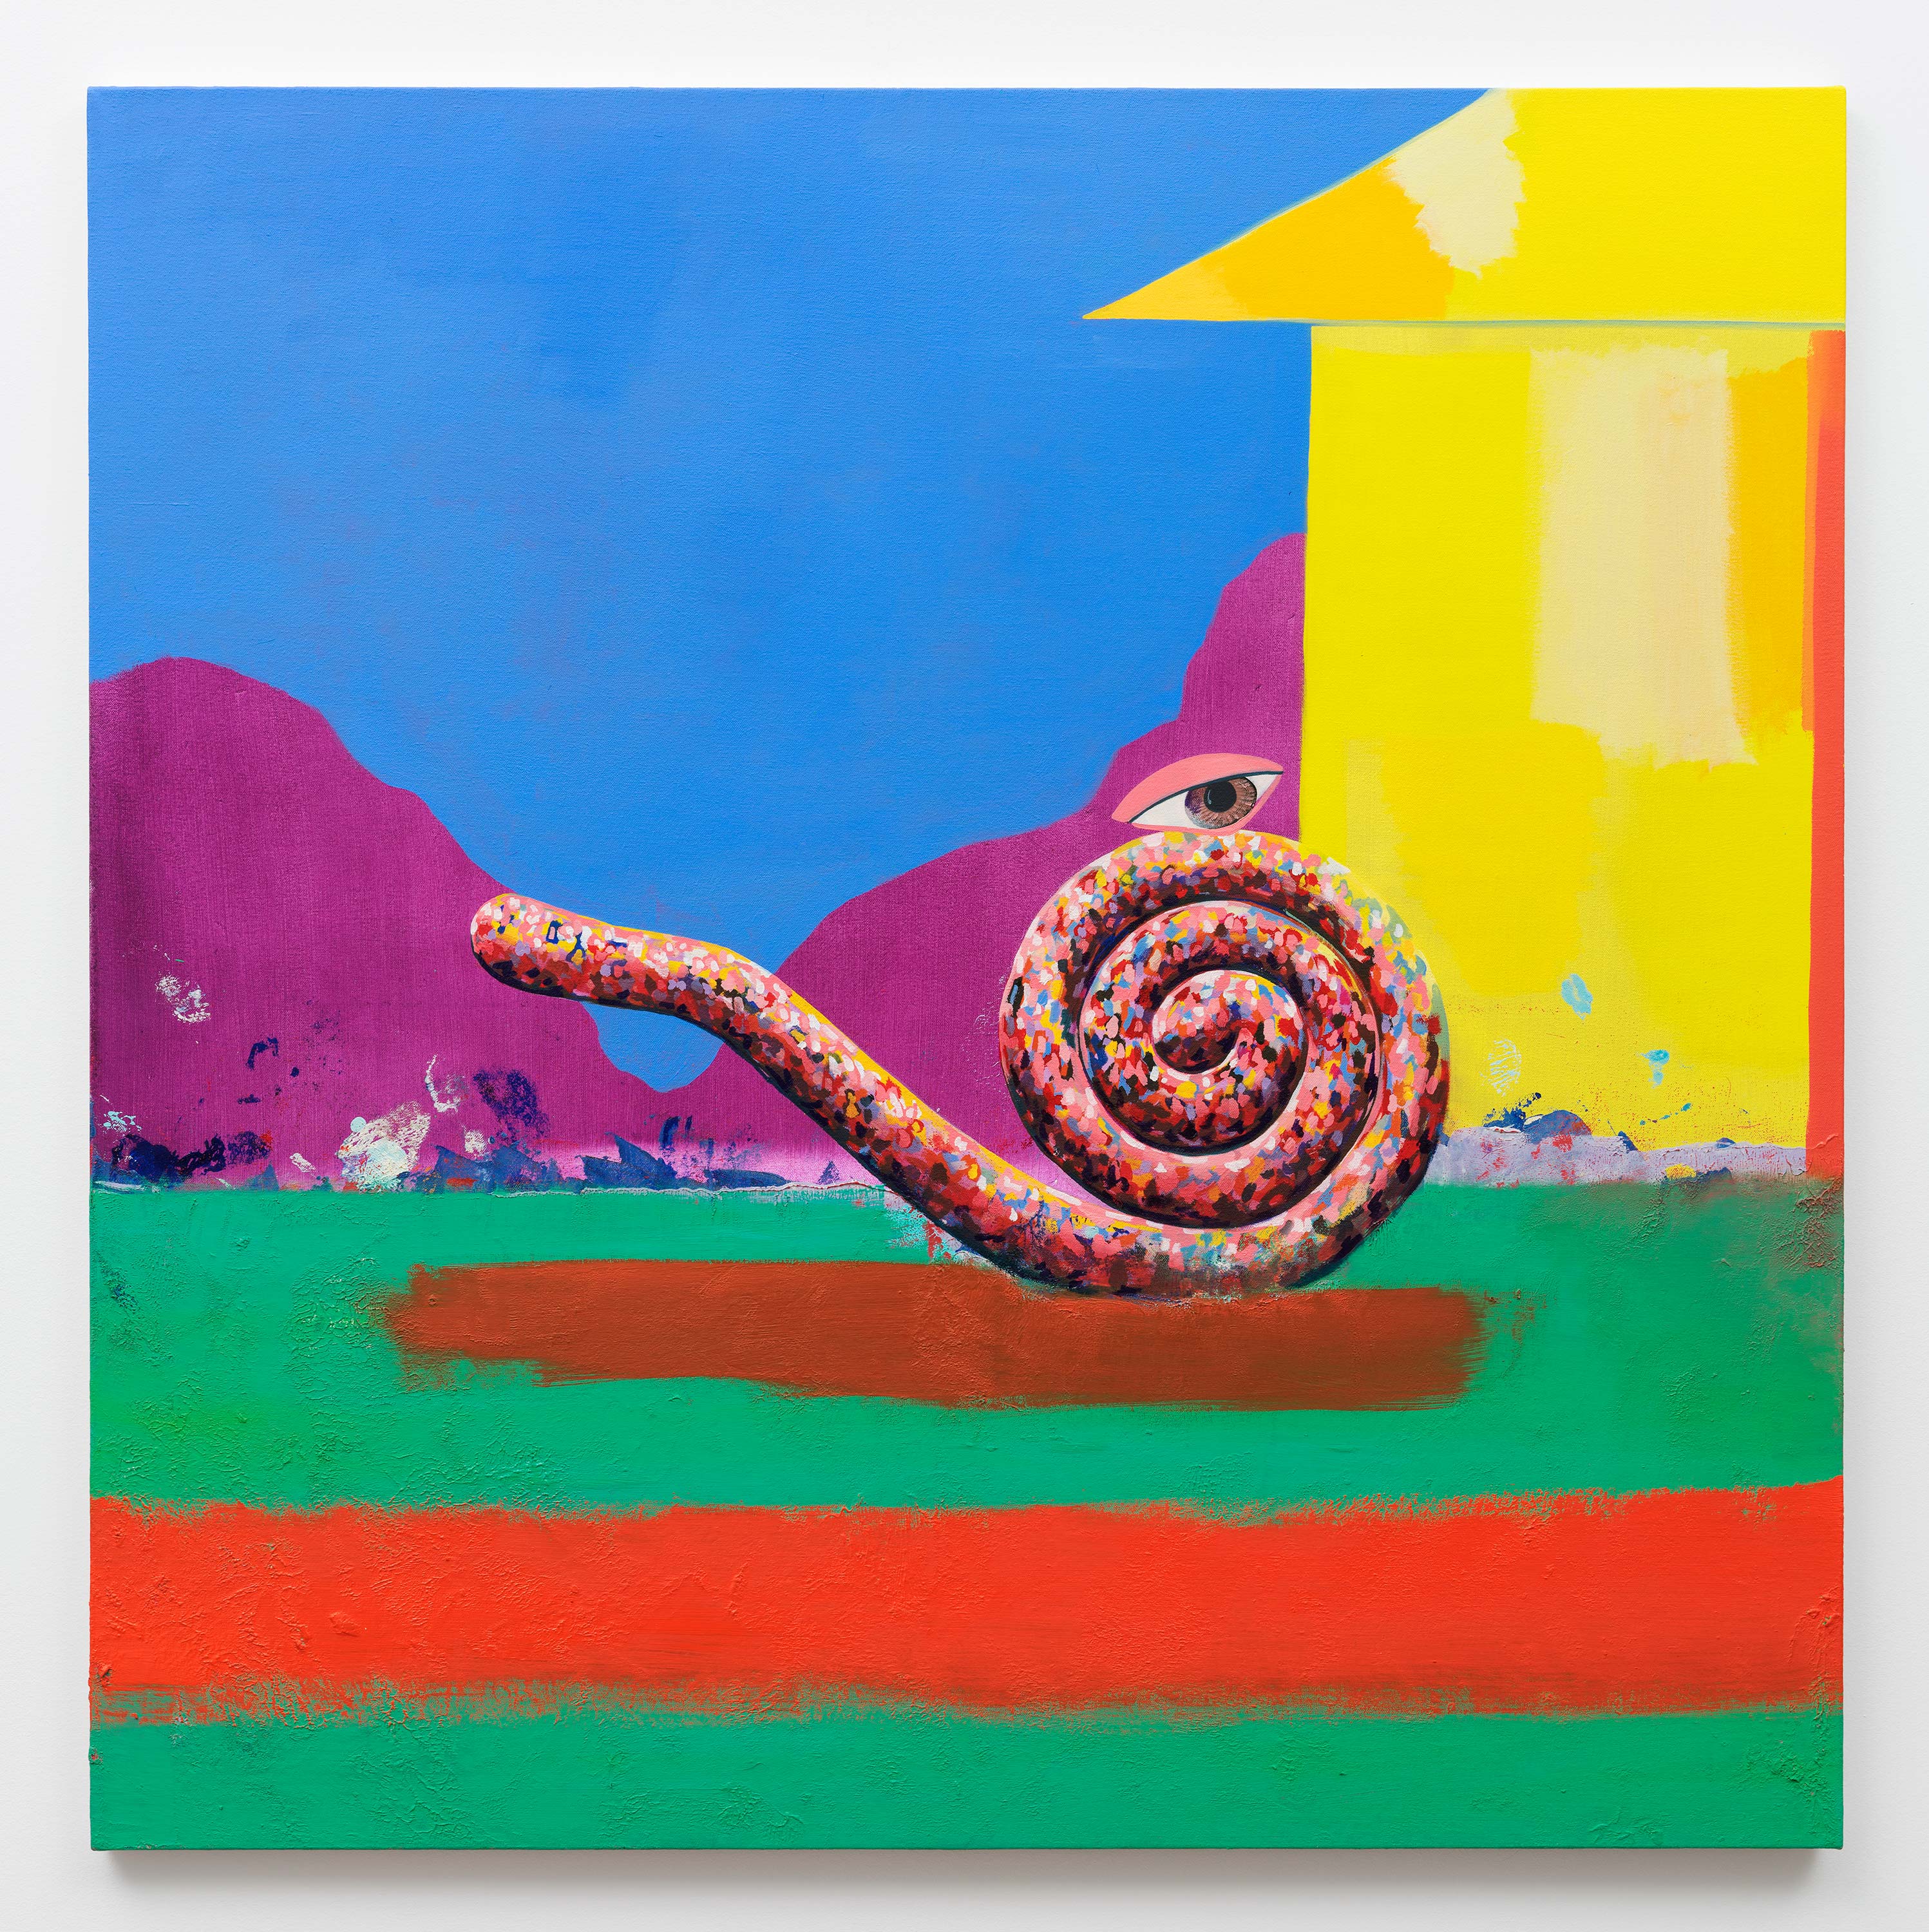 Paul Branca<br>Untitled, Spiral<br>2015<br>Oil on canvas<br>40 x 40 inches (101.6 x 101.6 cm)